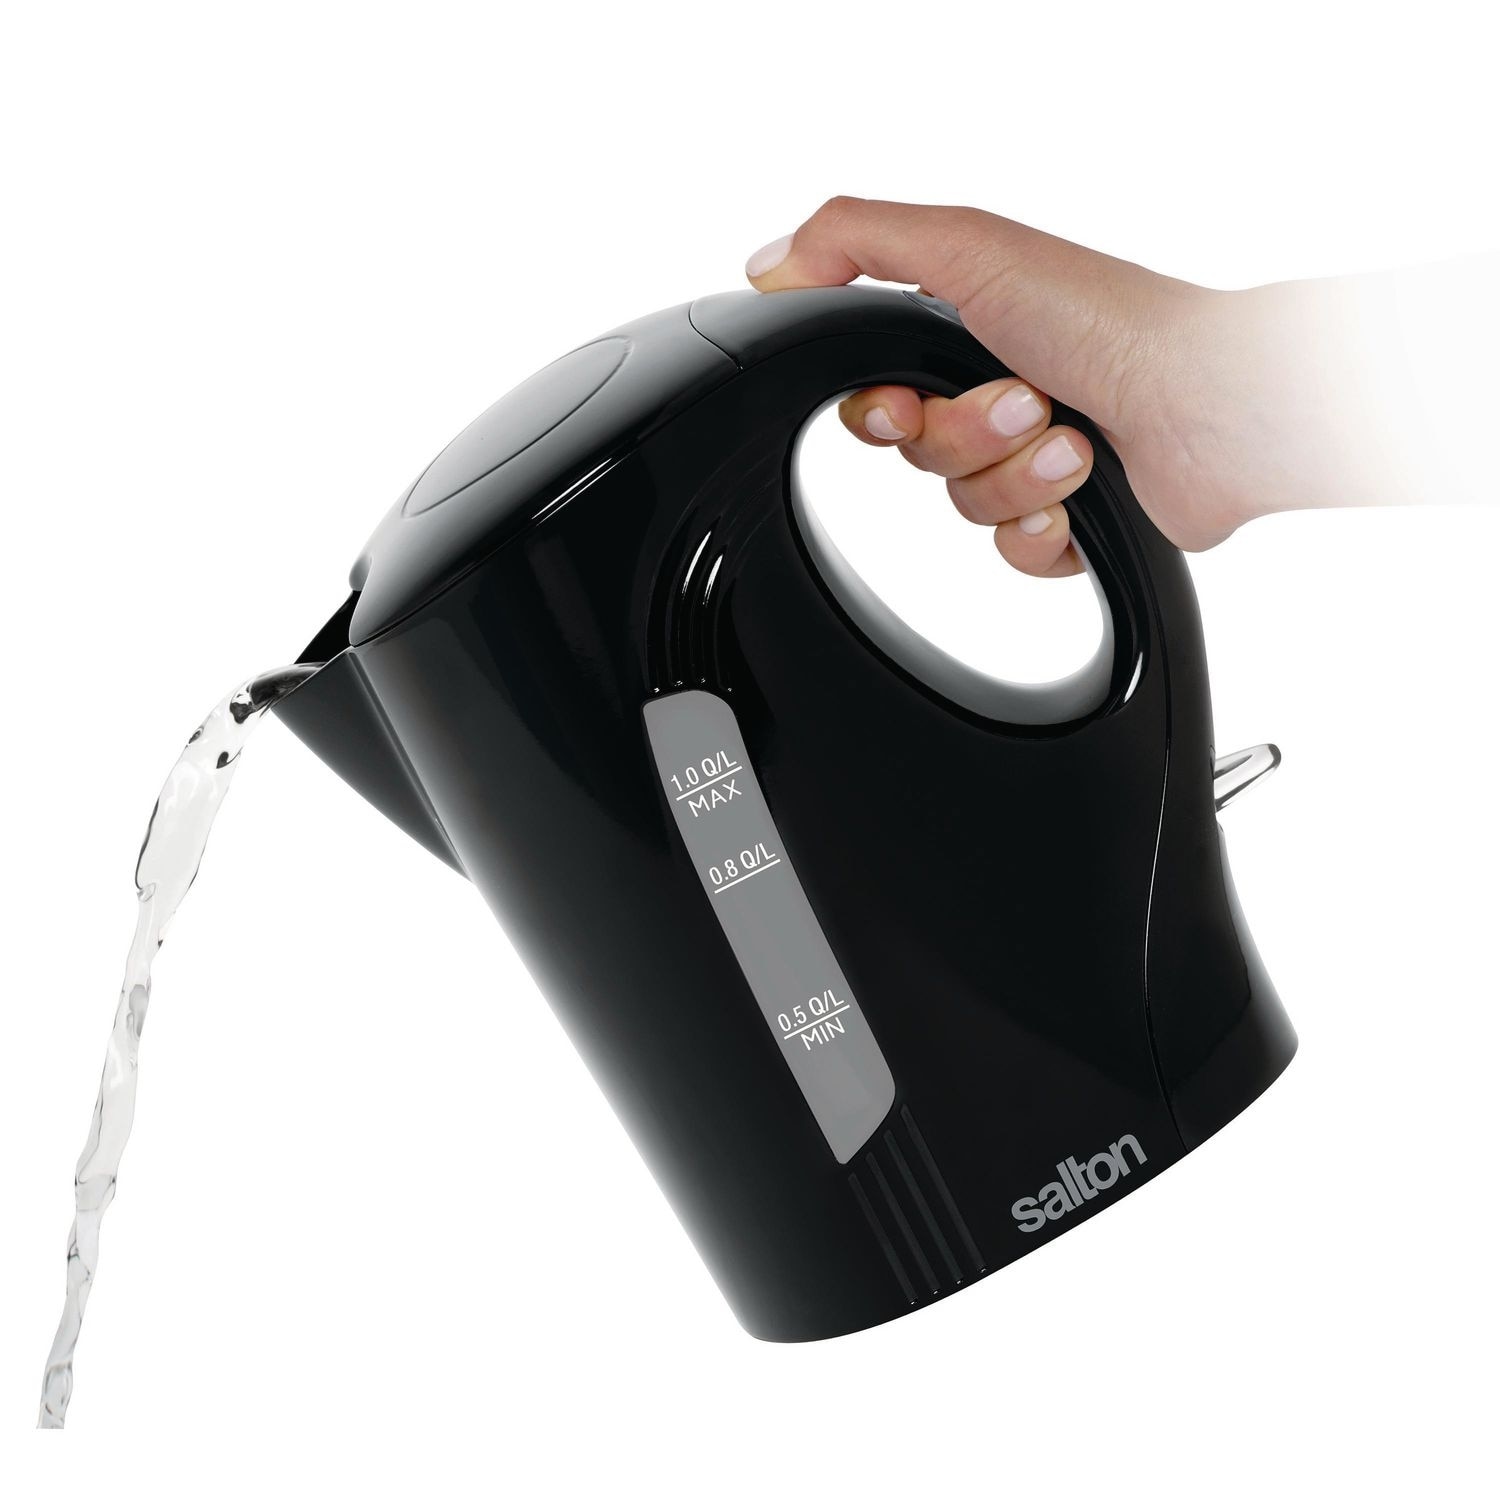 https://ak1.ostkcdn.com/images/products/is/images/direct/afe134aa09594273aad1fa1f058966d4b92d35e7/Salton-Cordless-1L-Kettle.jpg